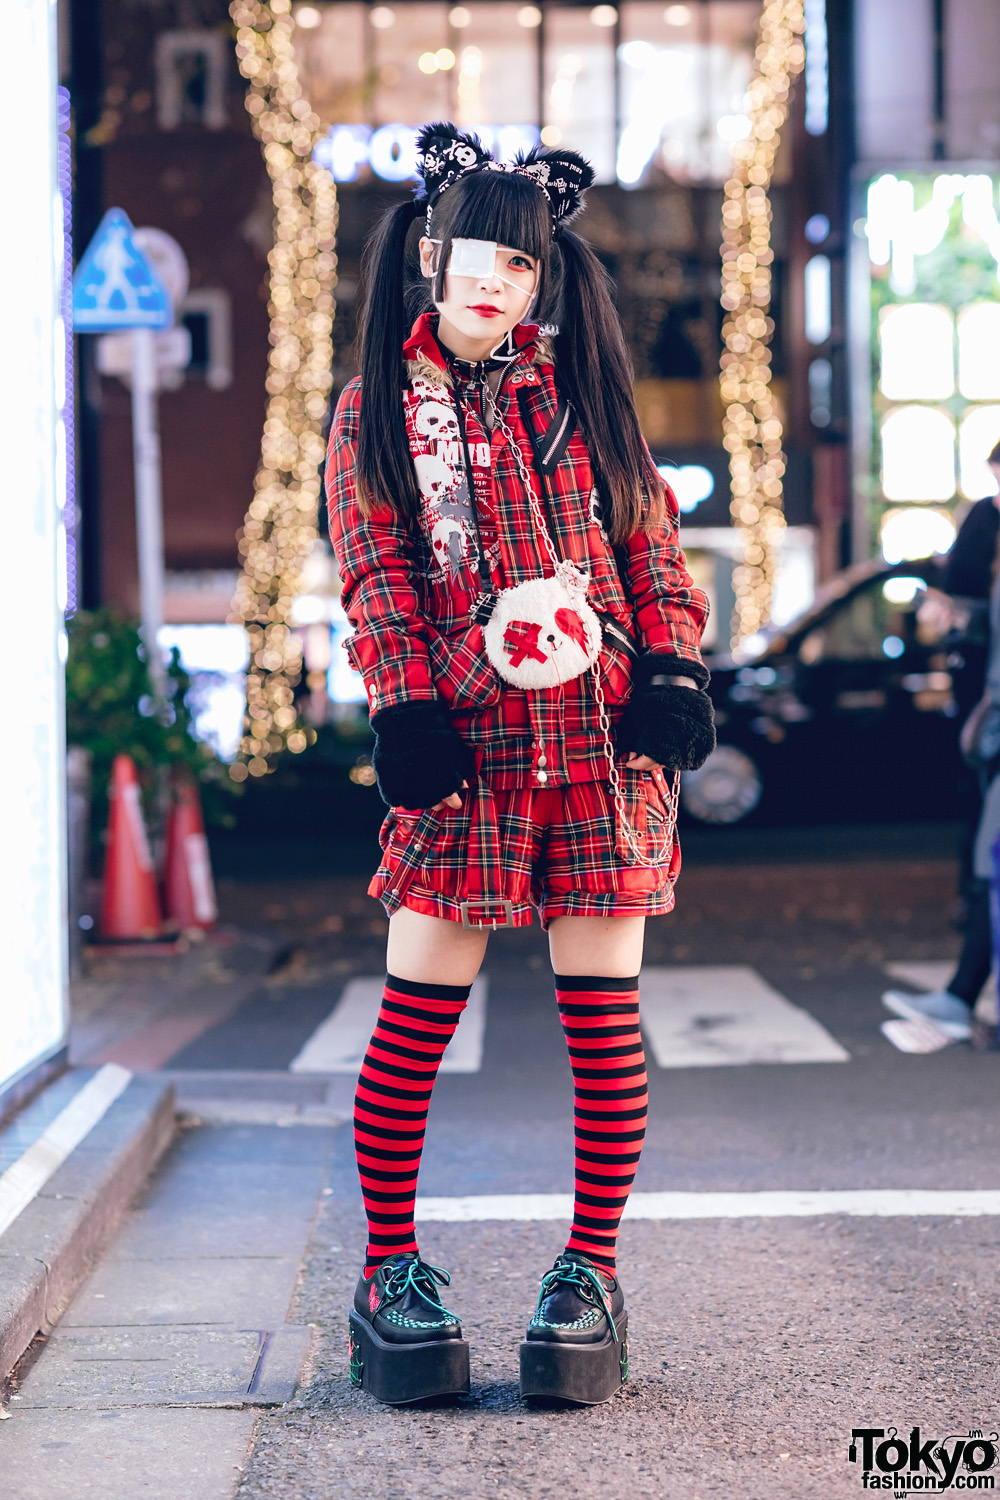 Harajuku Goth Girl in Red Plaid Street Fashion w/ Twin Tails, Cat Ears